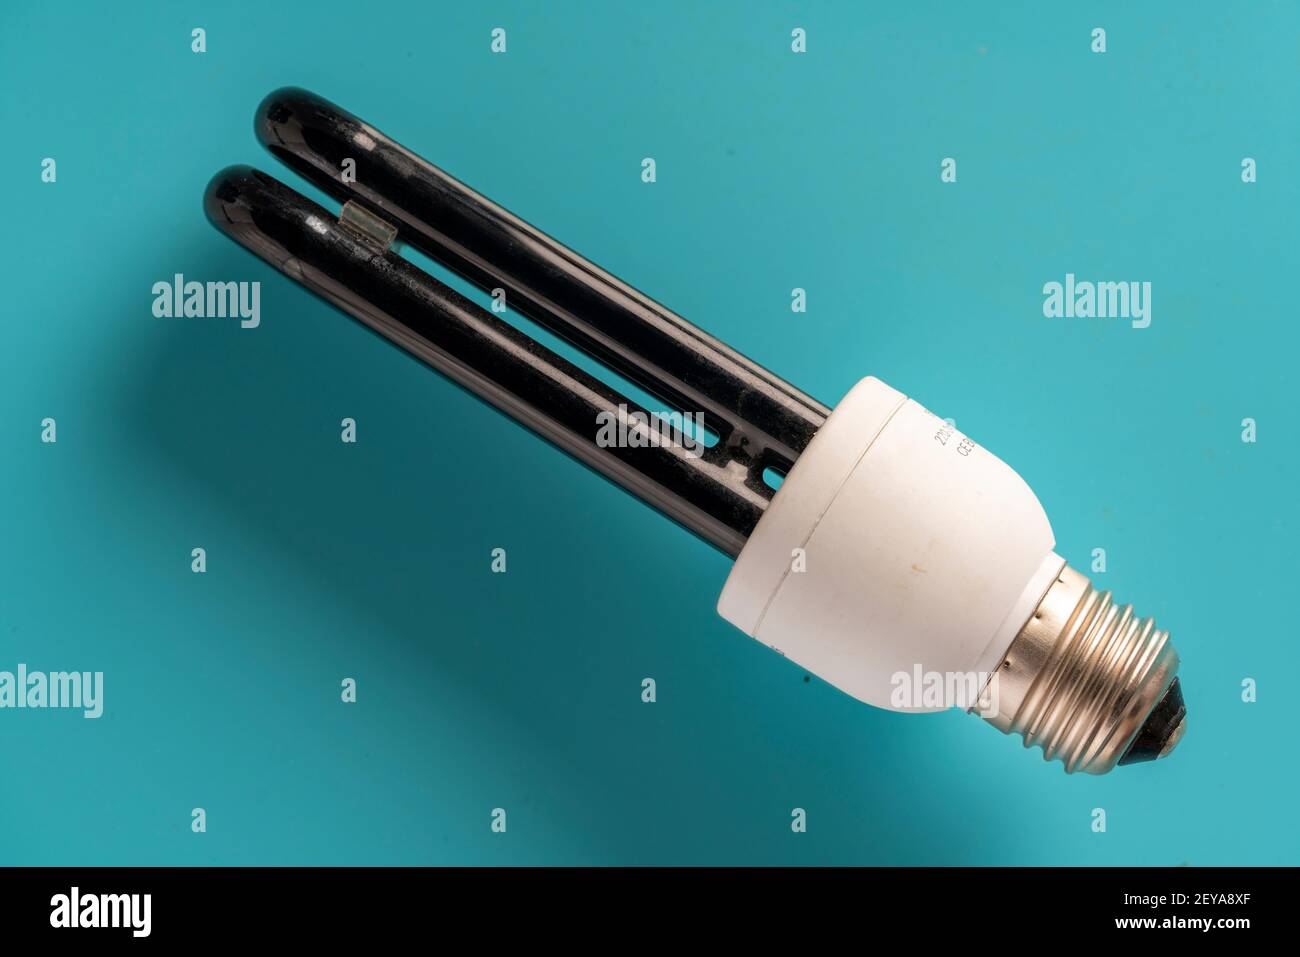 UV lamp for disinfection Stock Photo